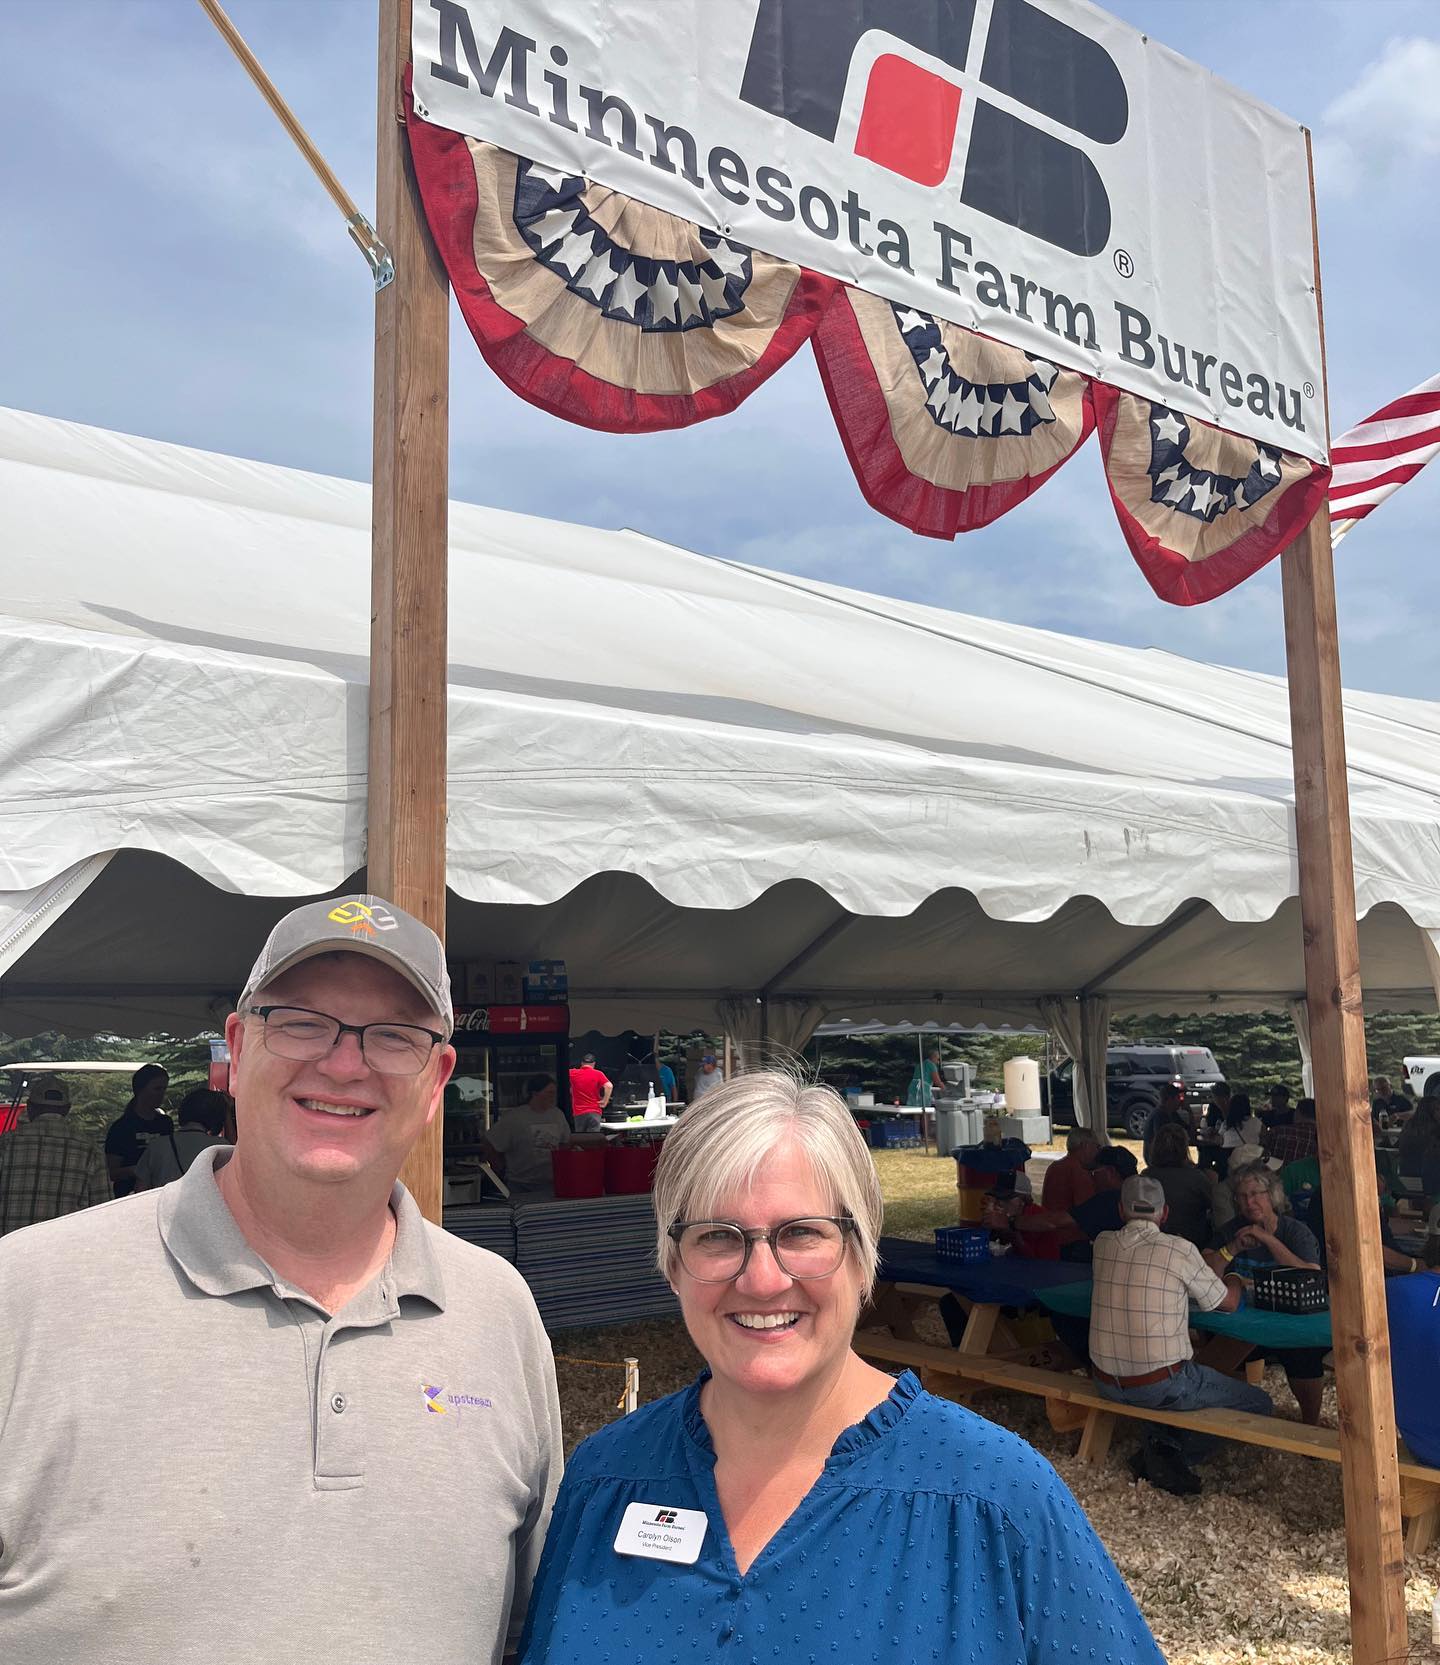 Checking in from @mnfarmfest in Morgan, Minnesota. Farmfest strives to bring together the best in agribusiness and provide a place for farmers to network. Stop by and network with 400+ exhibitors showing the latest in agriculture, see live demonstrations, listen to live music and see farm machinery. 🚜Swipe to see Upstream partners @centracare_mn and @compeerfinancial at #MNFarmFest. — from Instagram